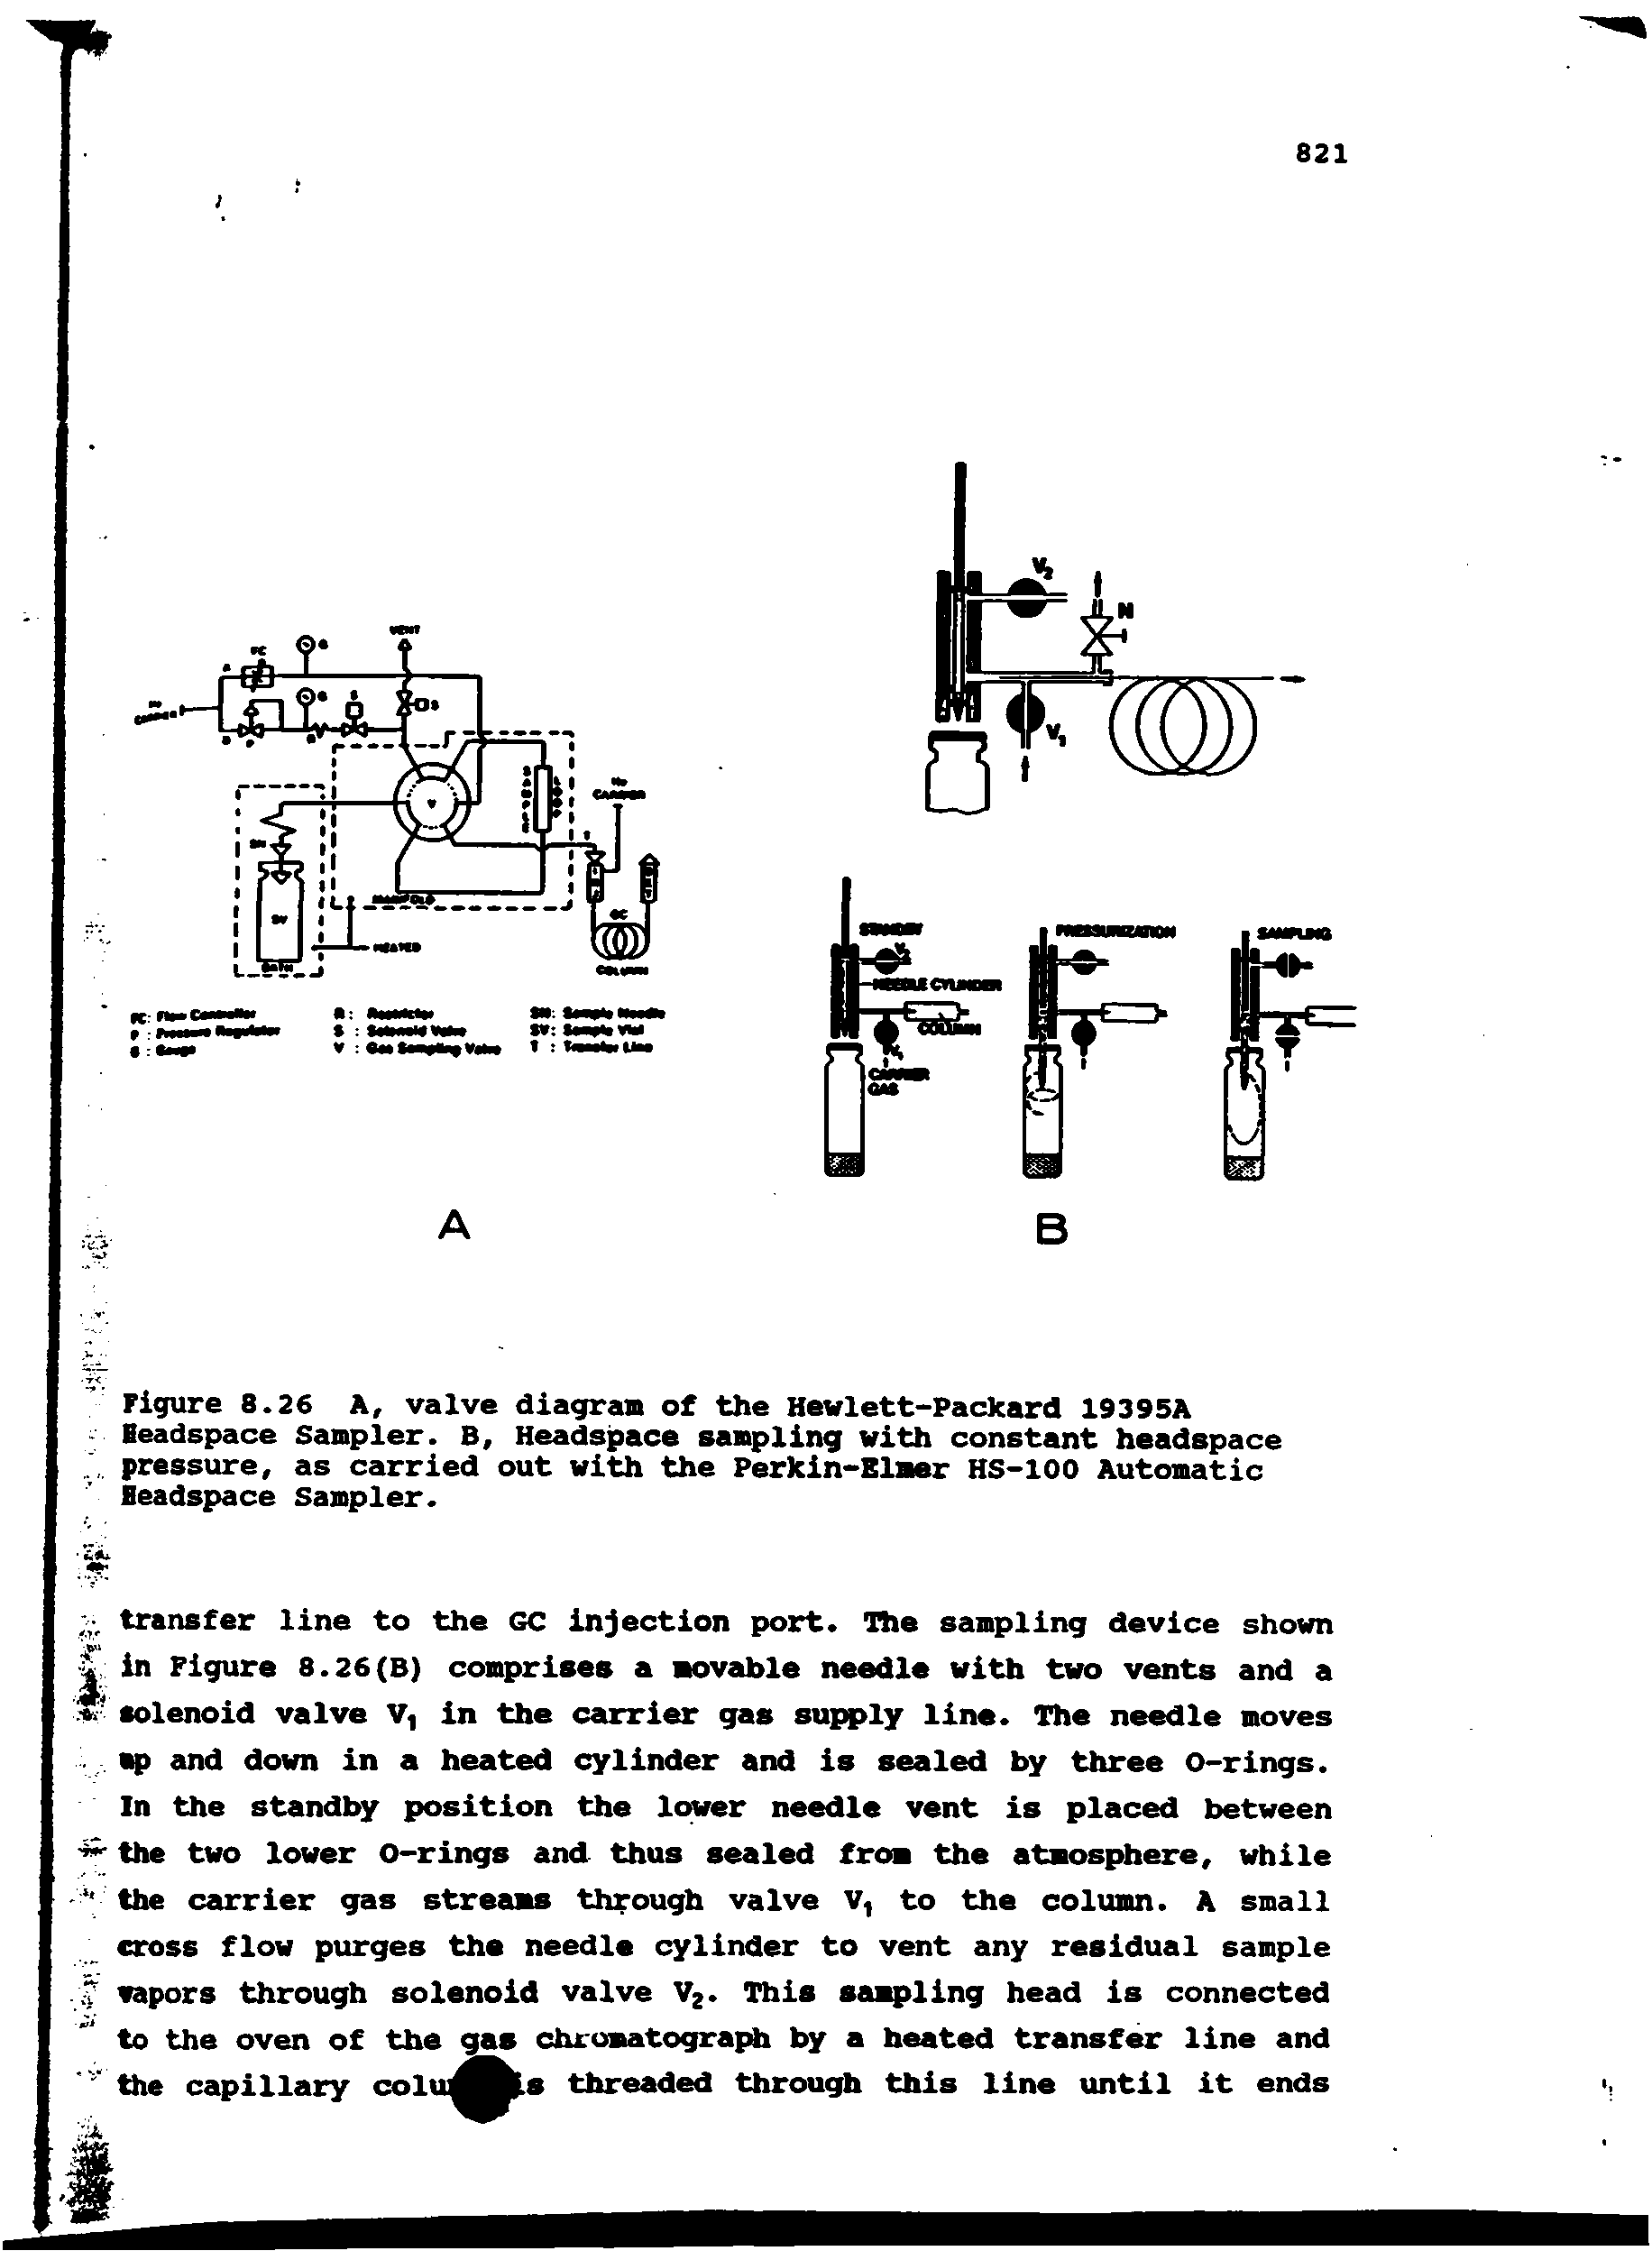 Figure 8.26 A, valve diagram of the Hewlett-Packard 19395A Beadspace Sampler. B, Headspace sampling with constant headspace pressure, as carried out with the Perkin-Elmer HS-lOO Automatic Headspace Sampler.